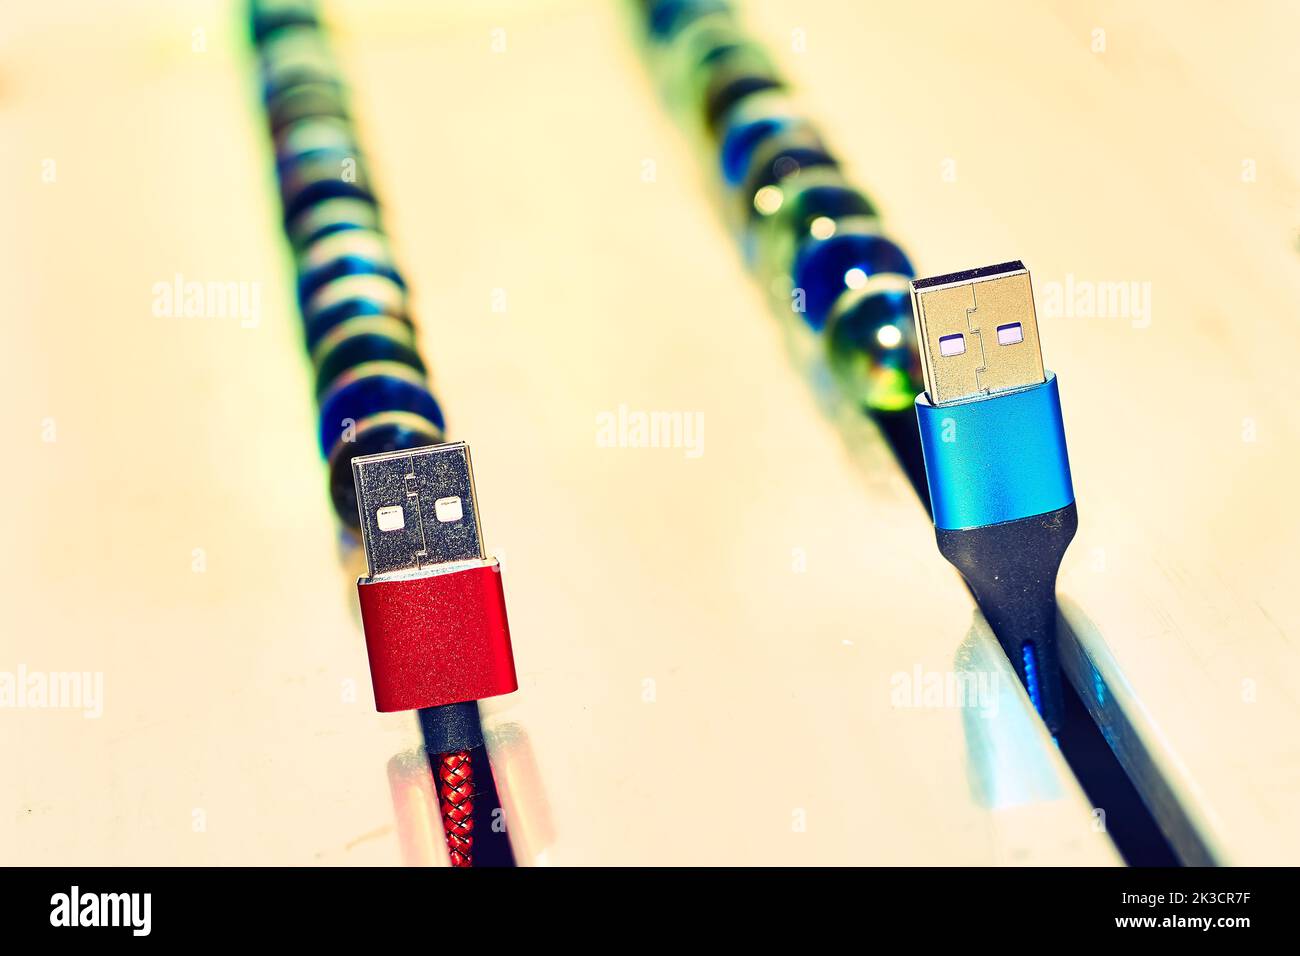 Connect and chat. Blue and red usb cables and colored balloons Stock Photo